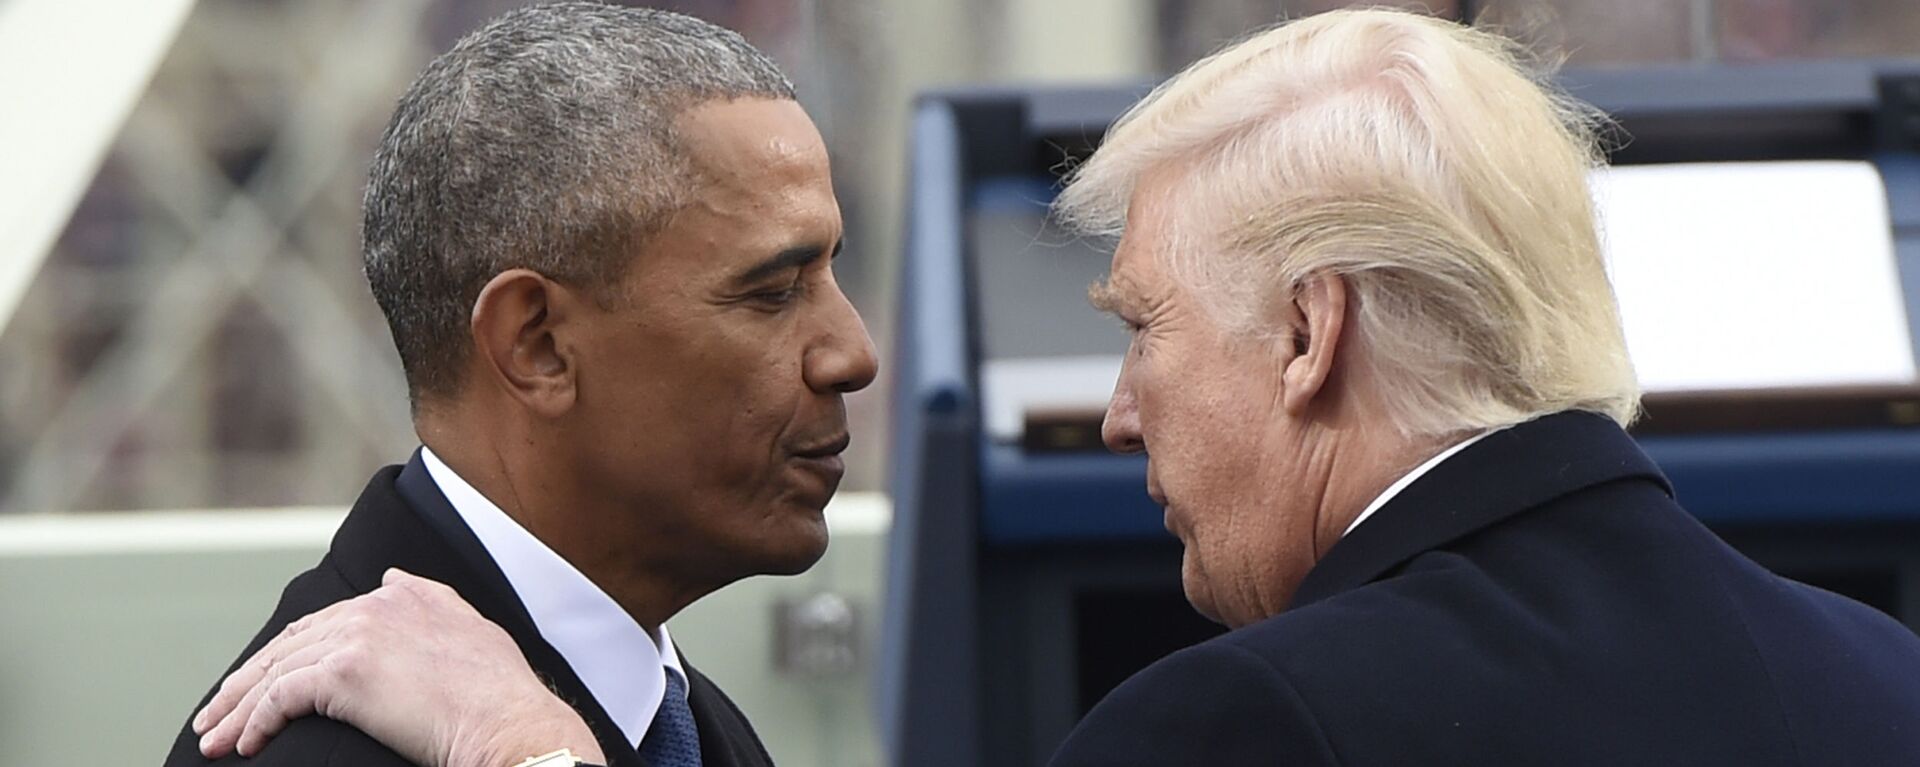 President Barack Obama speaks with President-elect Donald Trump during the presidential inauguration at the U.S. Capitol in Washington, Friday, Jan 20, 2017. - Sputnik International, 1920, 20.05.2021